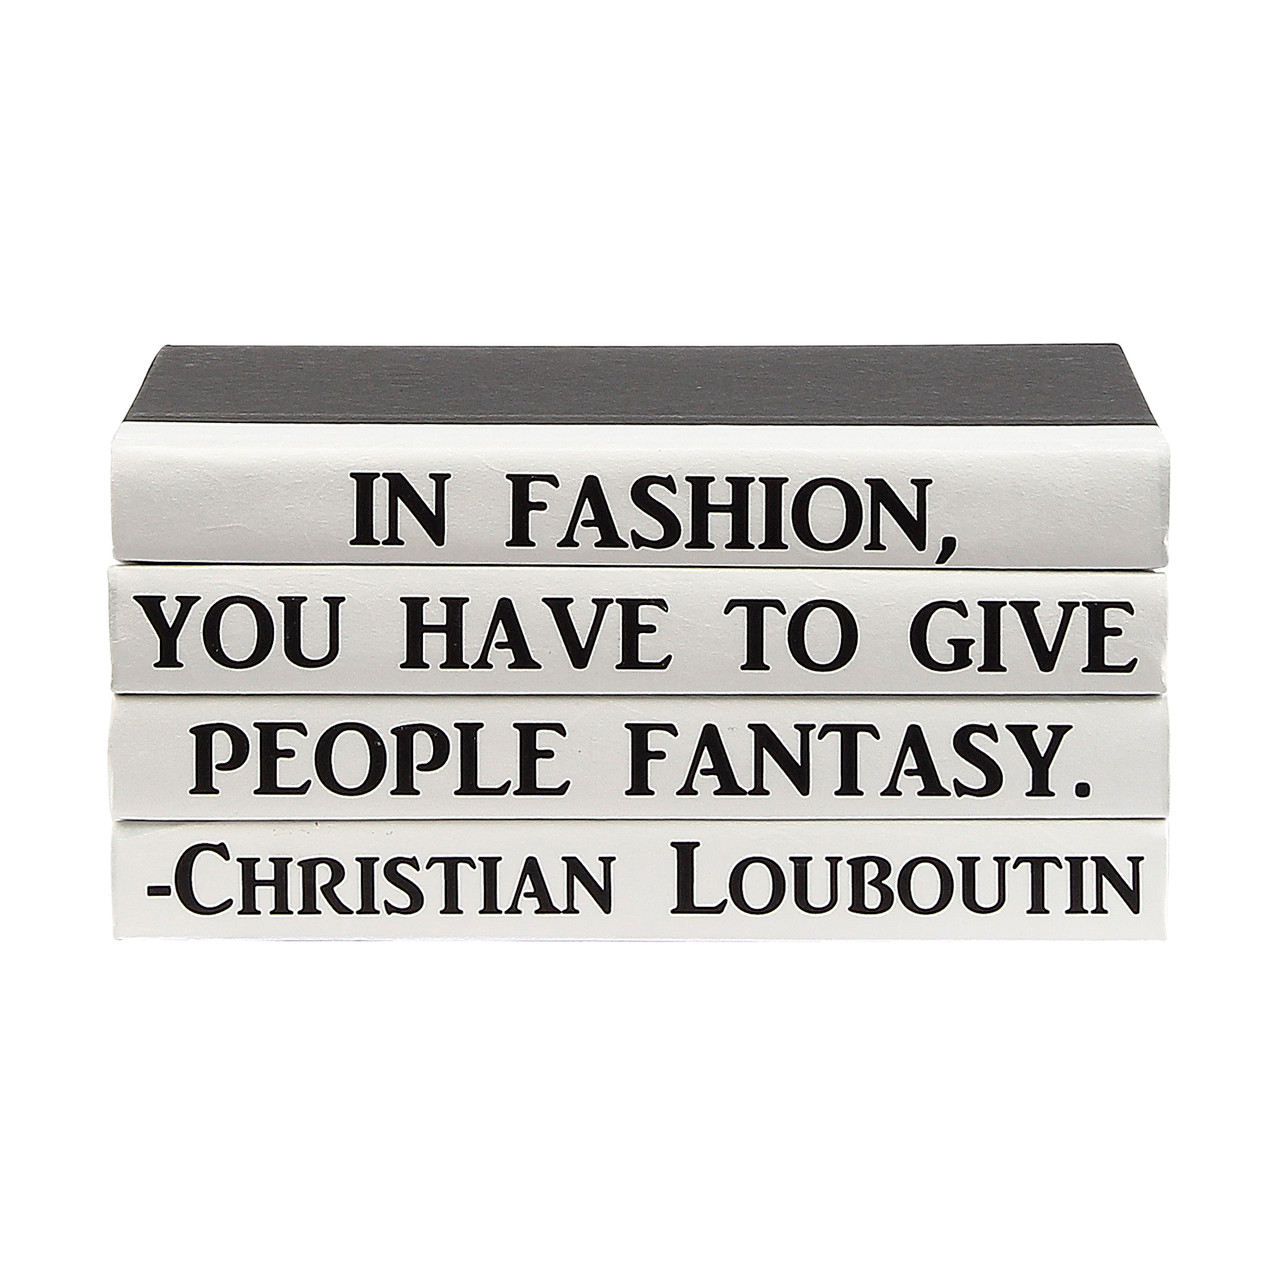 4 Vol- In Fashion Quote / Black Covers / 9.5 wide / Approx. 5 tall